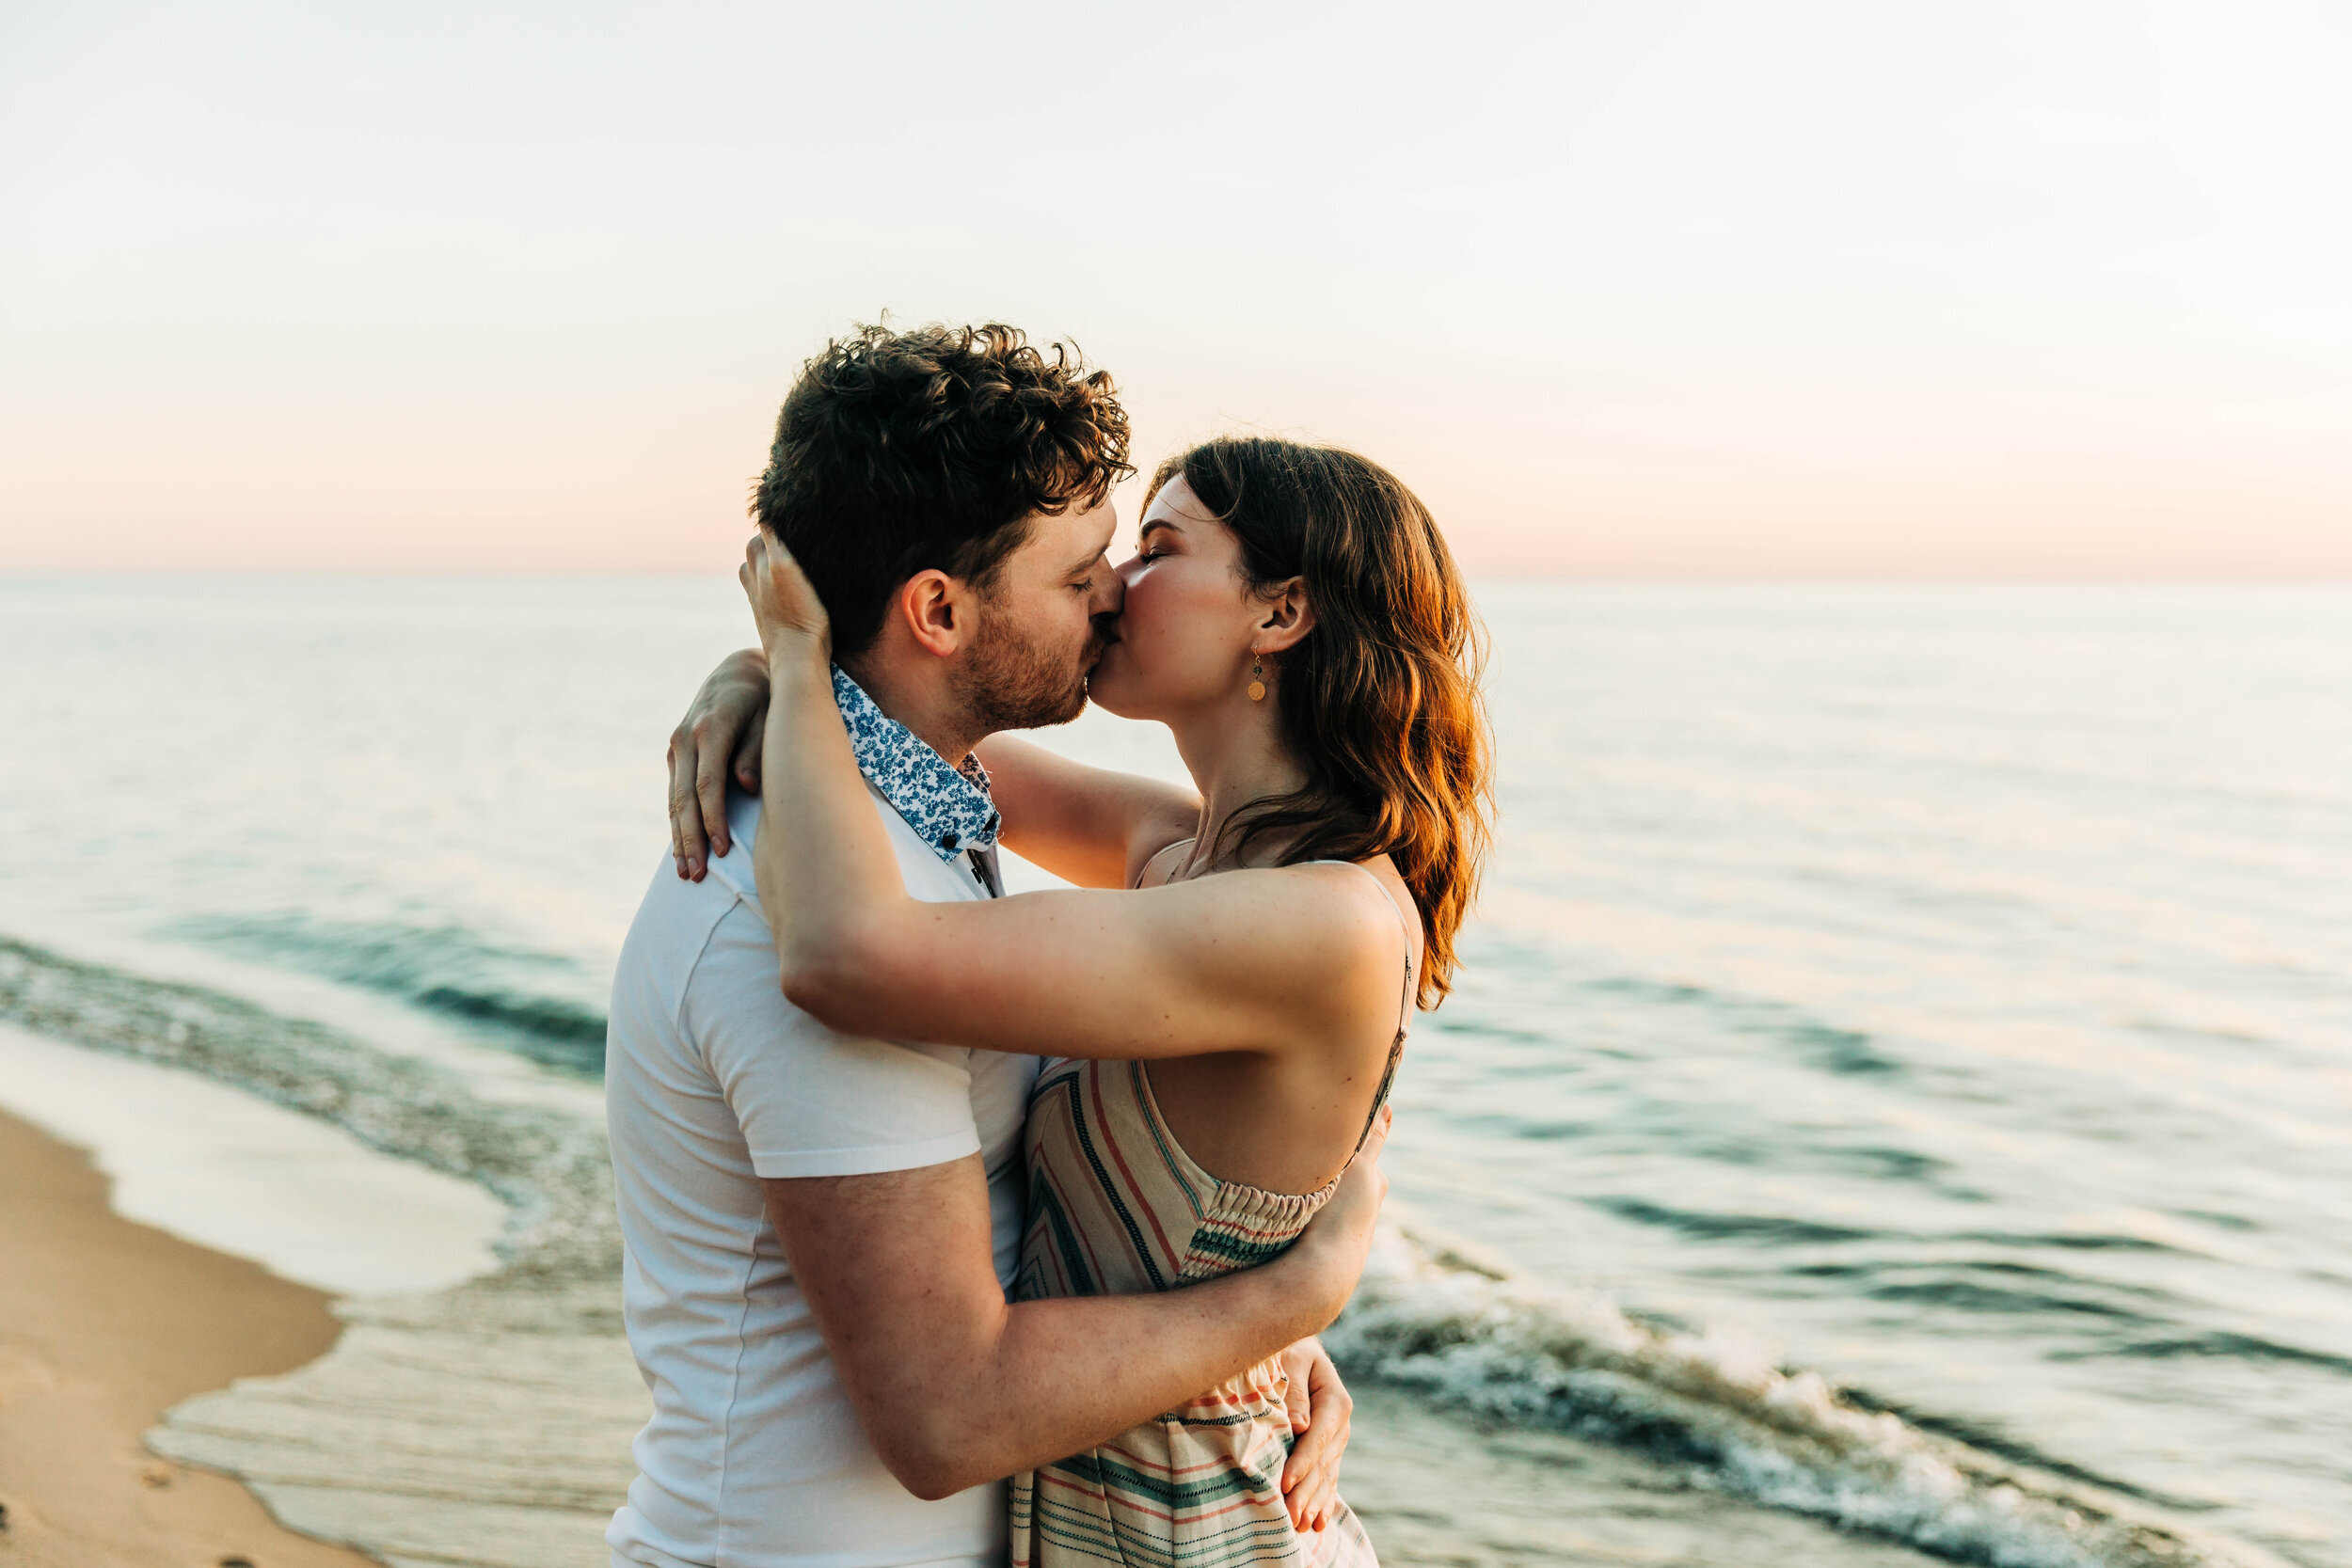 10 Best poses at Miami Beach for couples